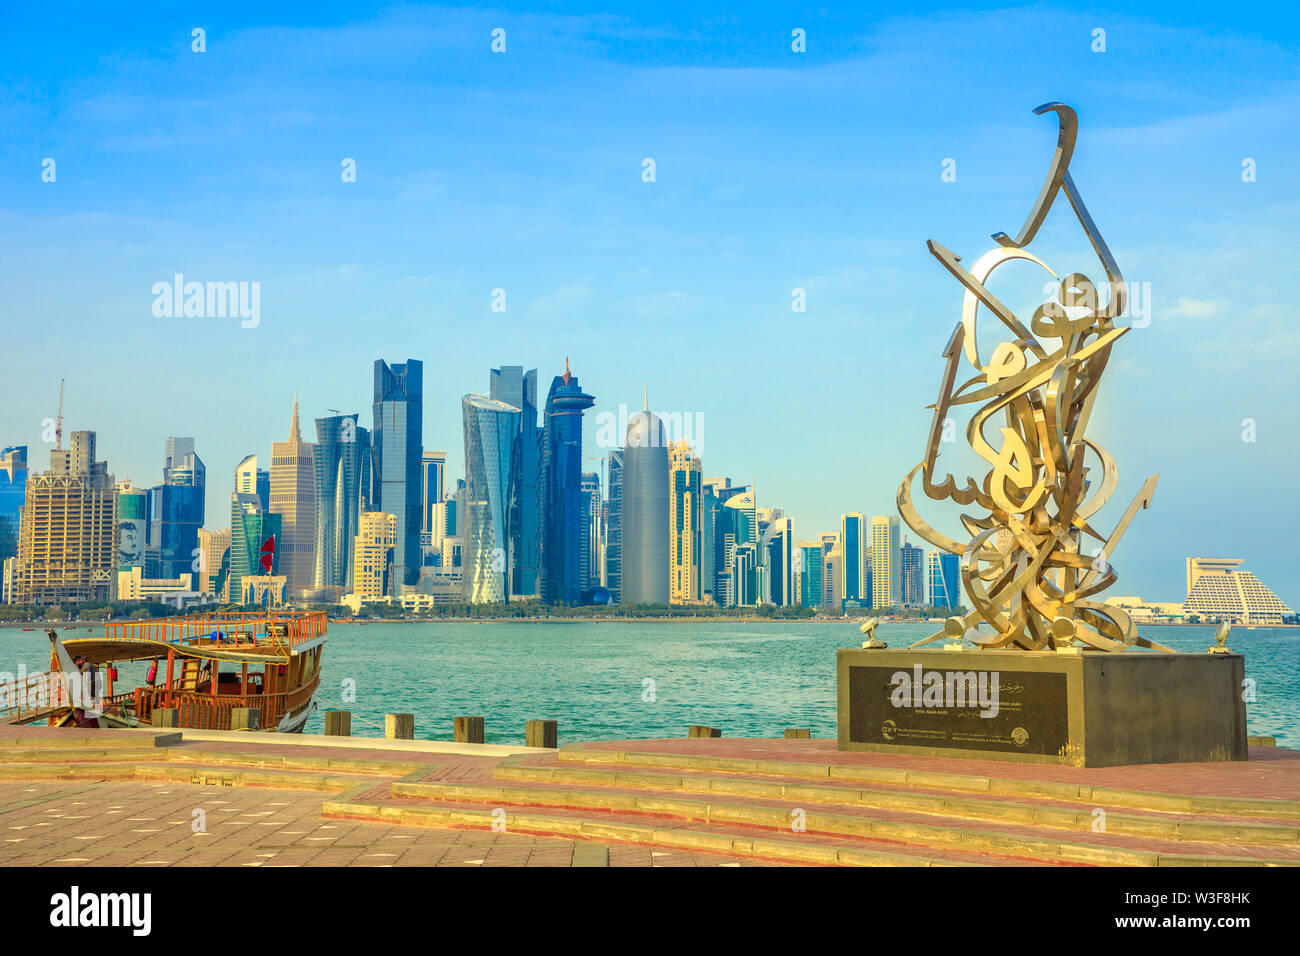 Doha, Qatar - February 23, 2019: Calligraphy sculpture on the corniche seaside promenade, wooden dhow and Doha West Bay skyline with Doha Tower, Salam Stock Photo